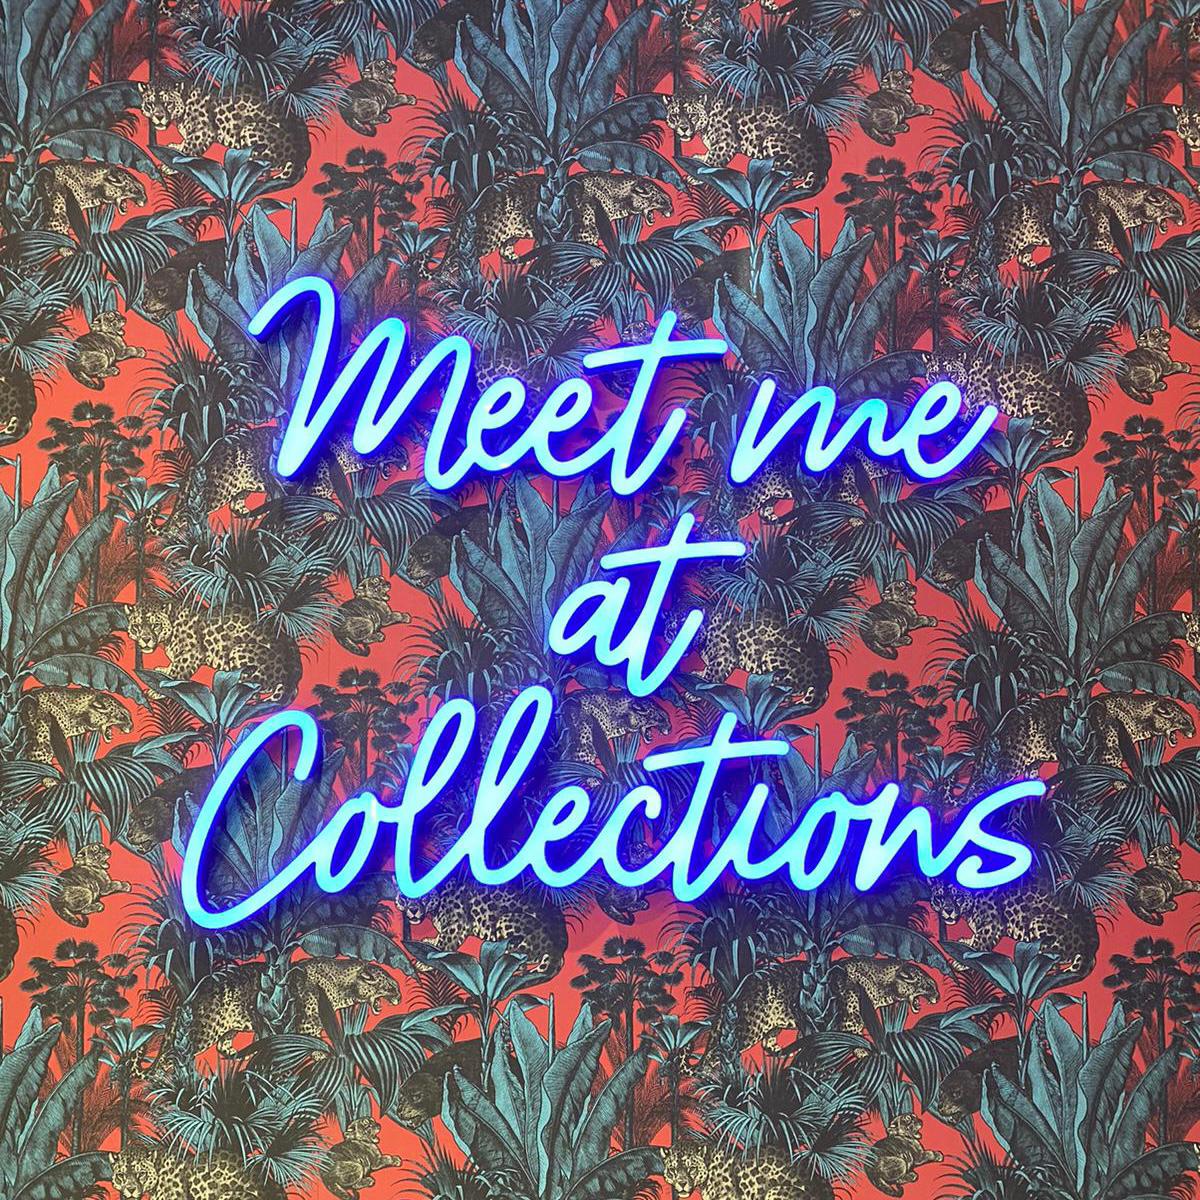 Meet Me At CollectionsJPG